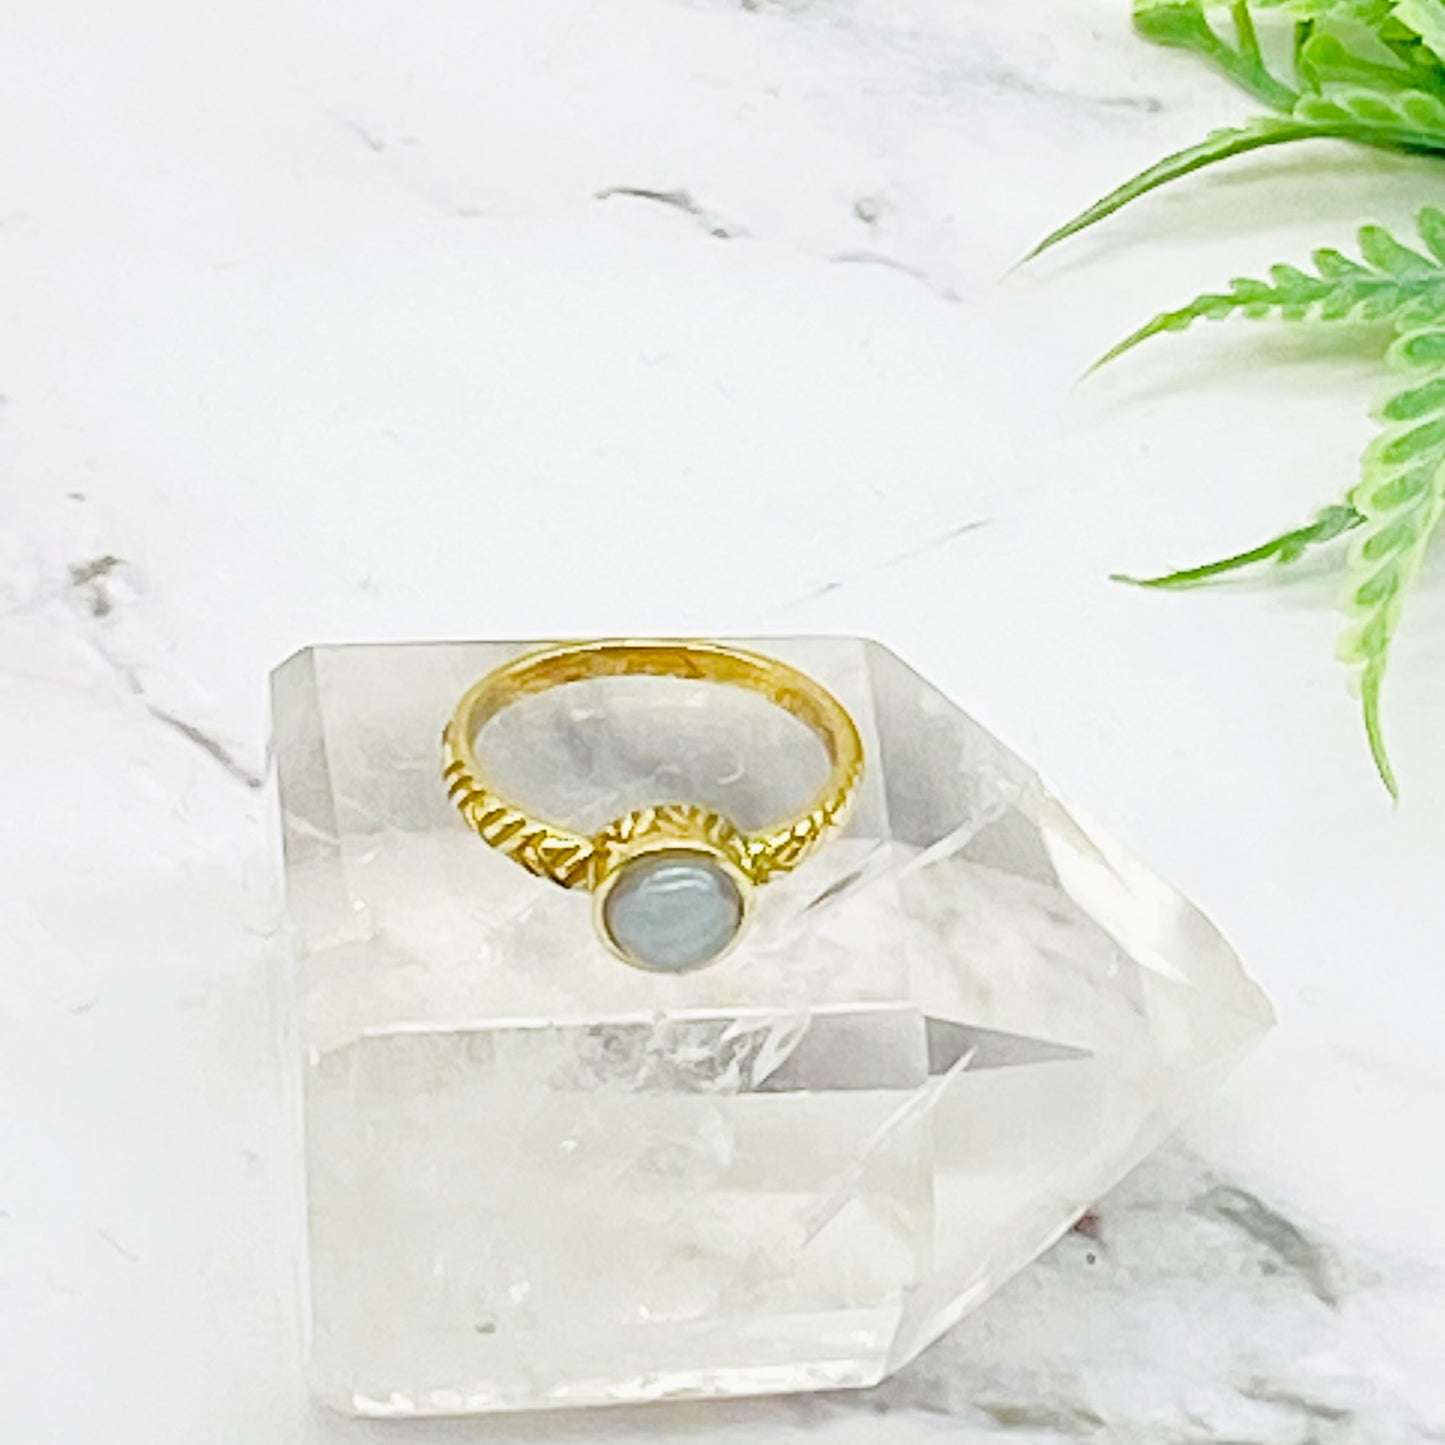 Gold Filled Stackable Rings, Crystal Rings, Handmade Jewelry, Bohemian Rings, Gift for Mom, Gold Band Rings, Fashionable Ring